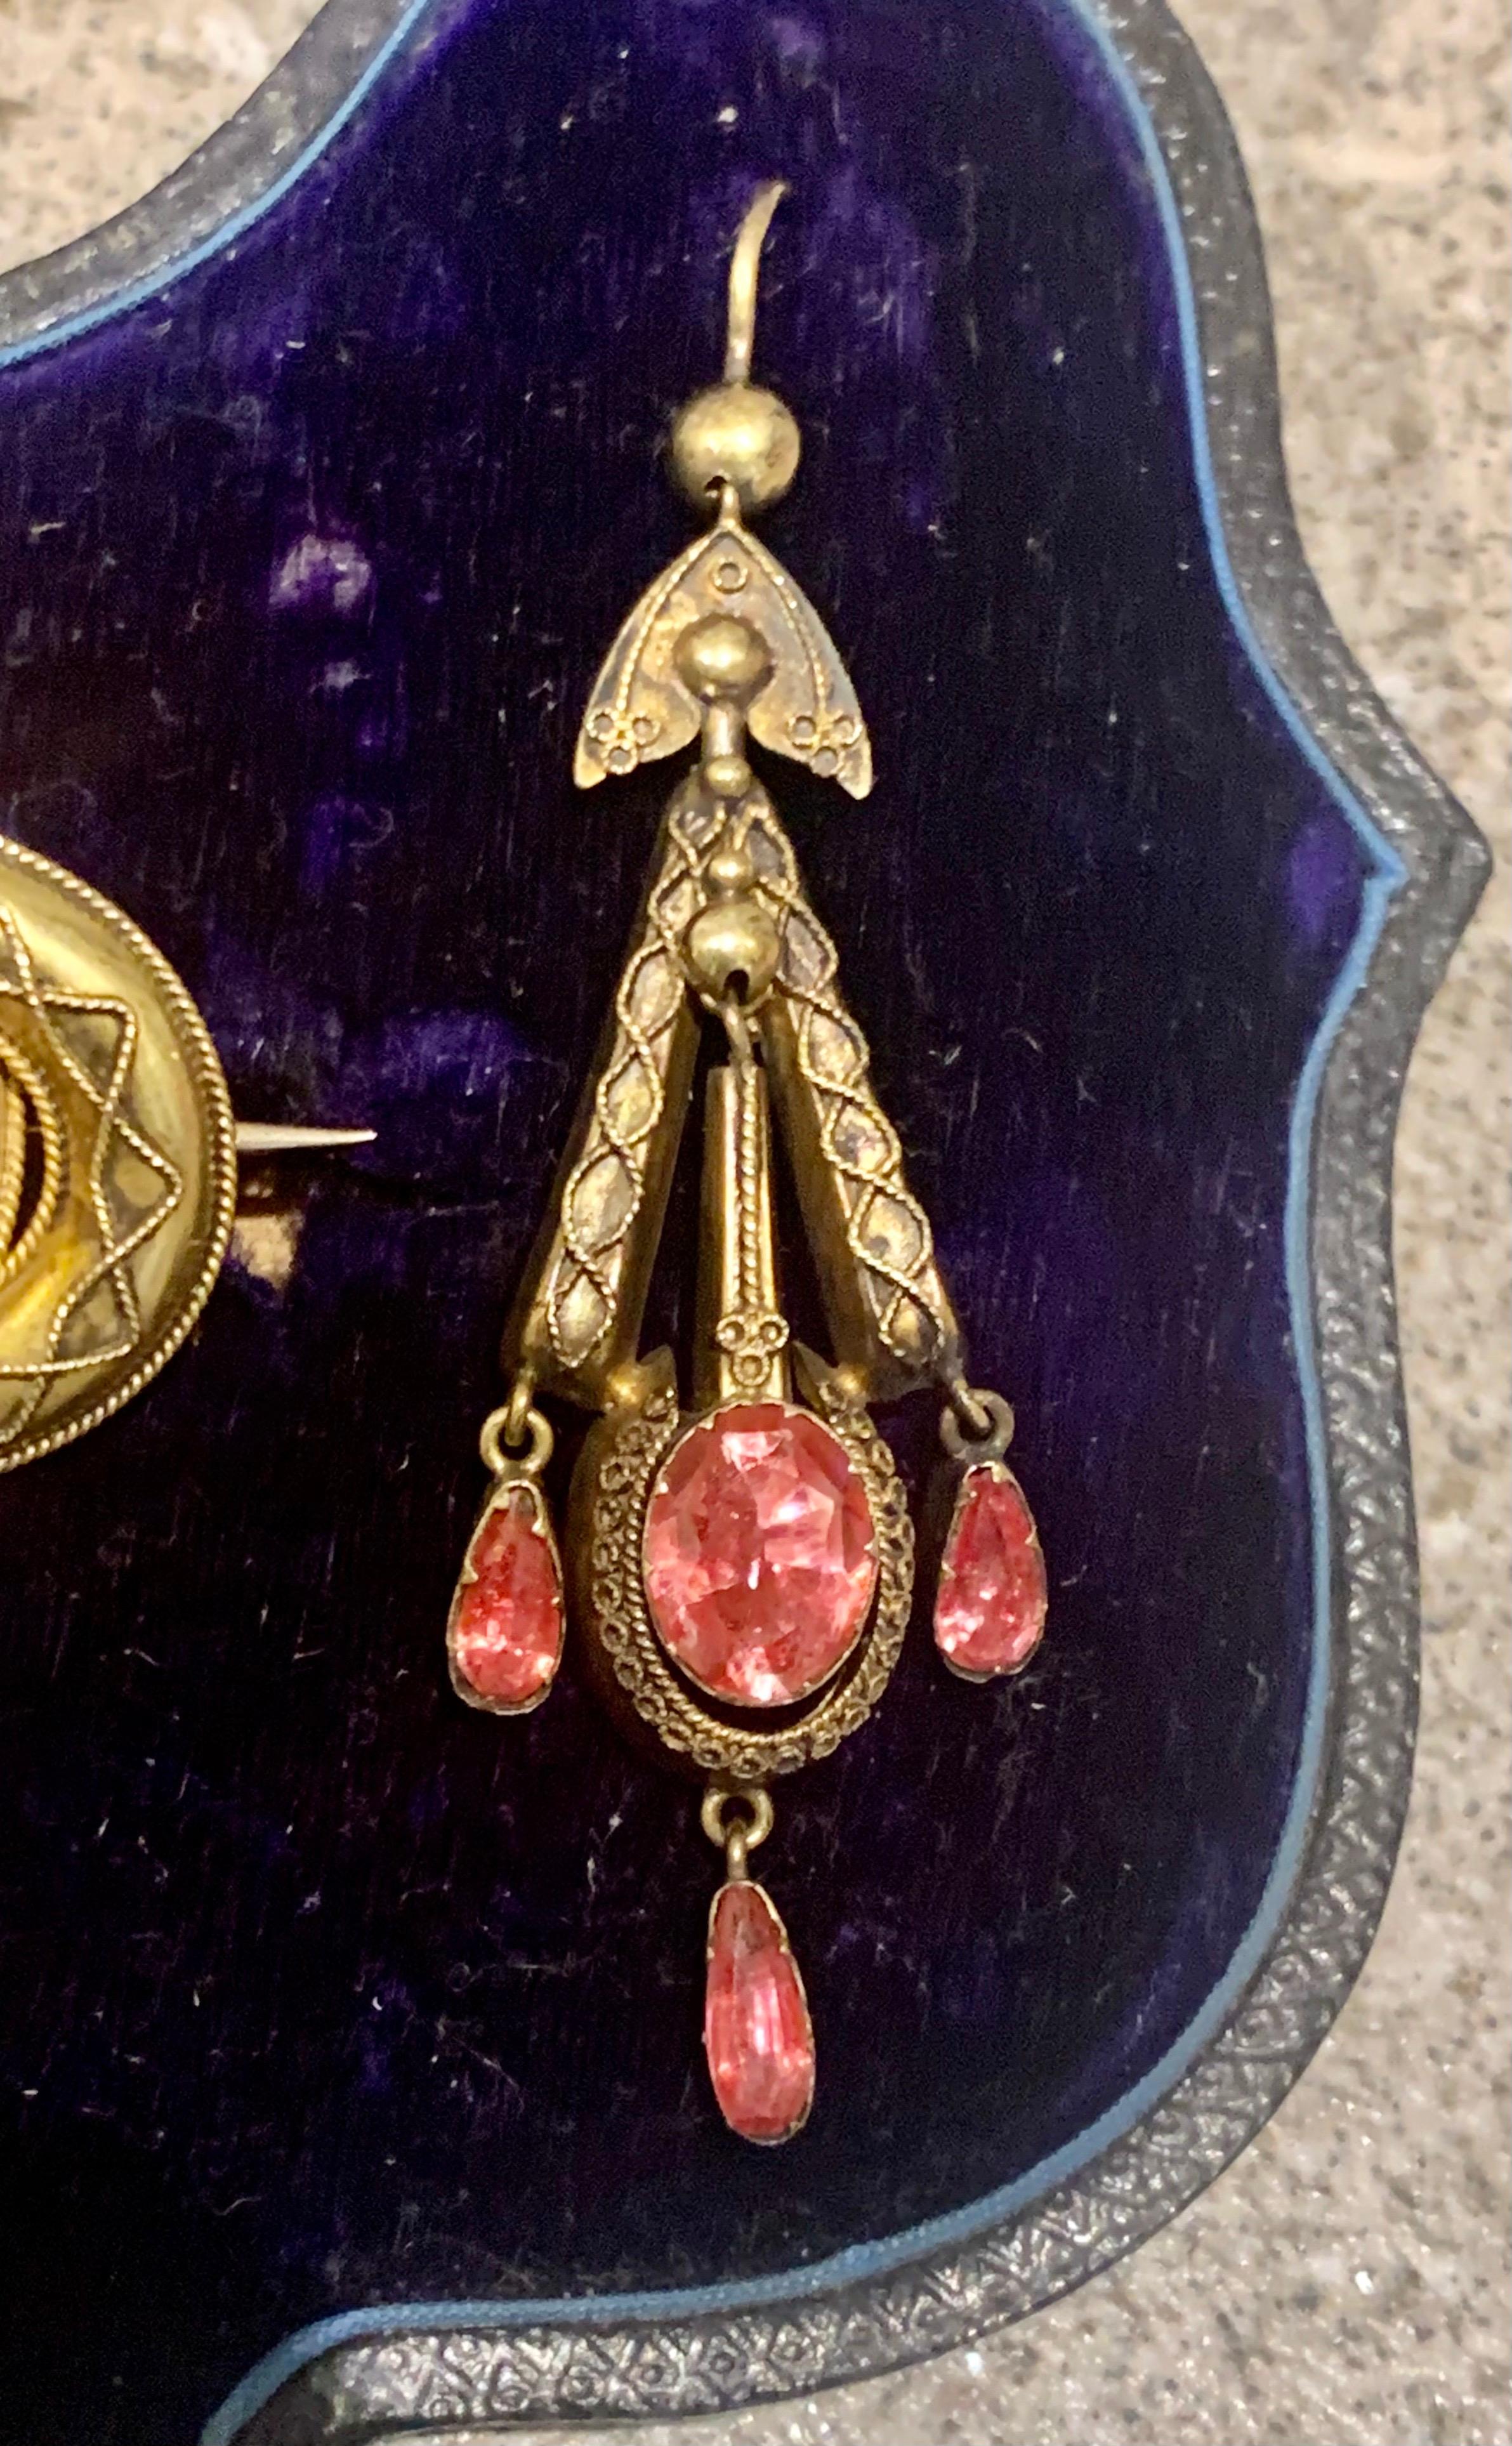 Women's Victorian Pinchbeck & Pink Tourmaline Brooch and Earring Set Cased